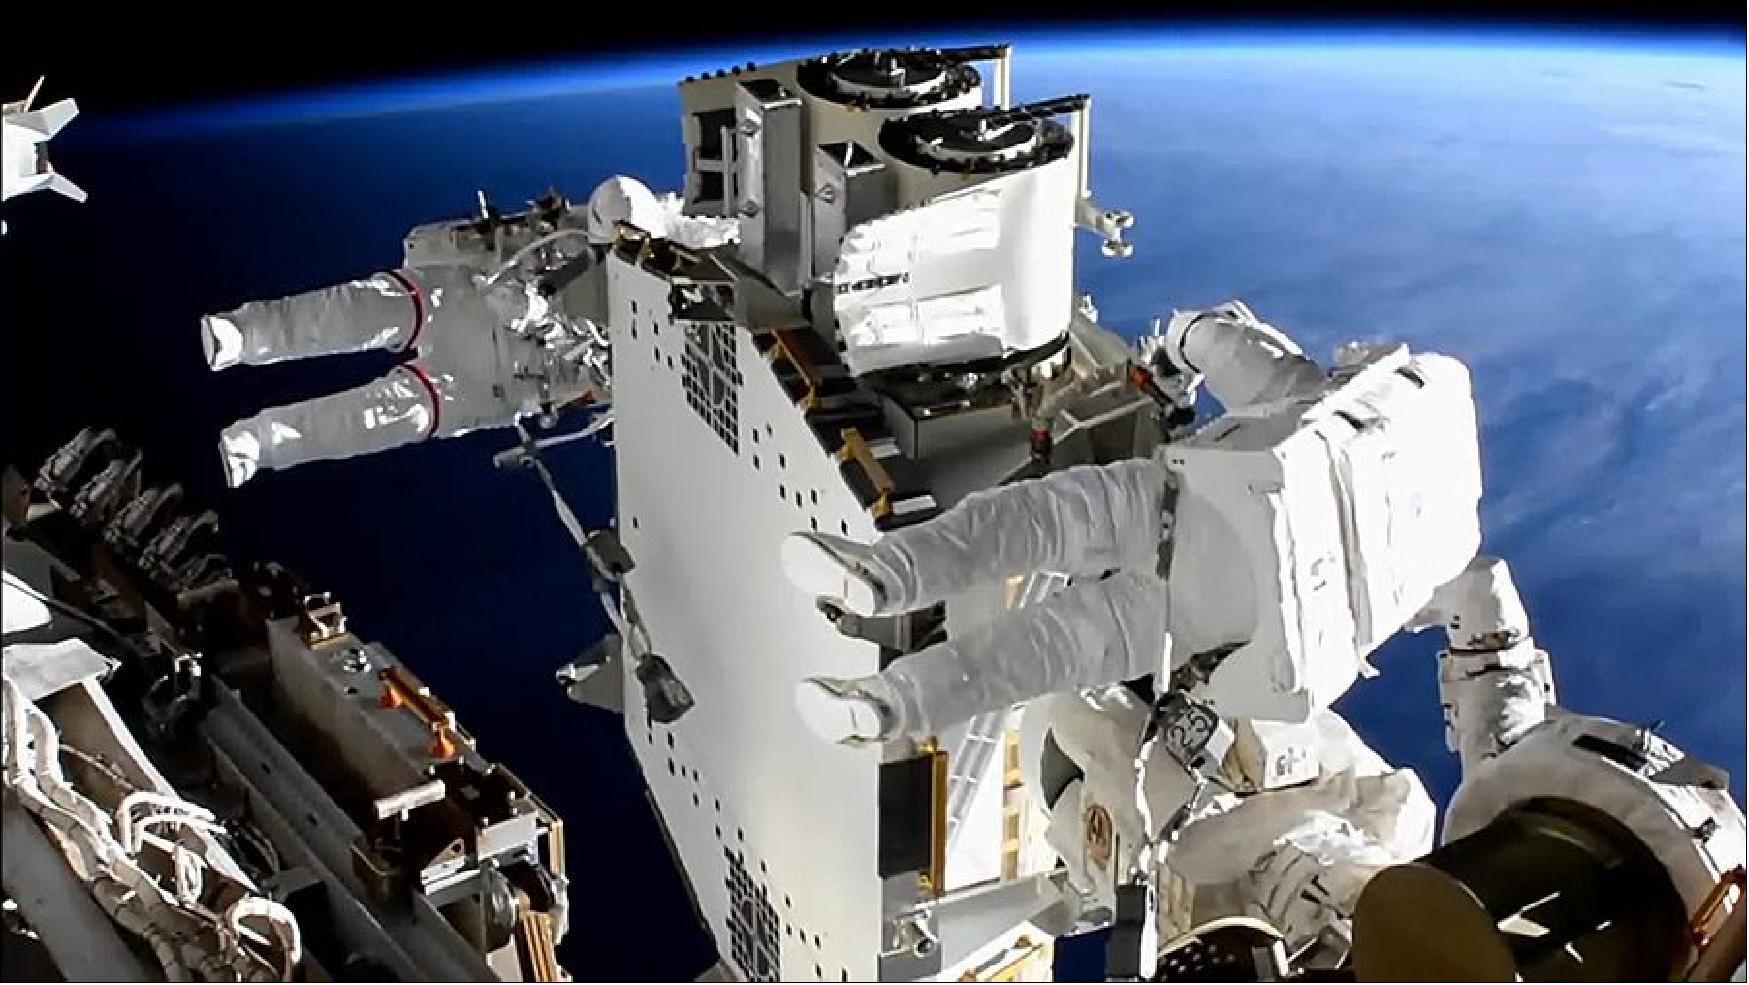 Figure 63: Spacewalkers Shane Kimbrough (foreground) and Thomas Pesquet work to prepare the second roll out solar array ready for installation an upcoming spacewalk (image credit: NASA TV)